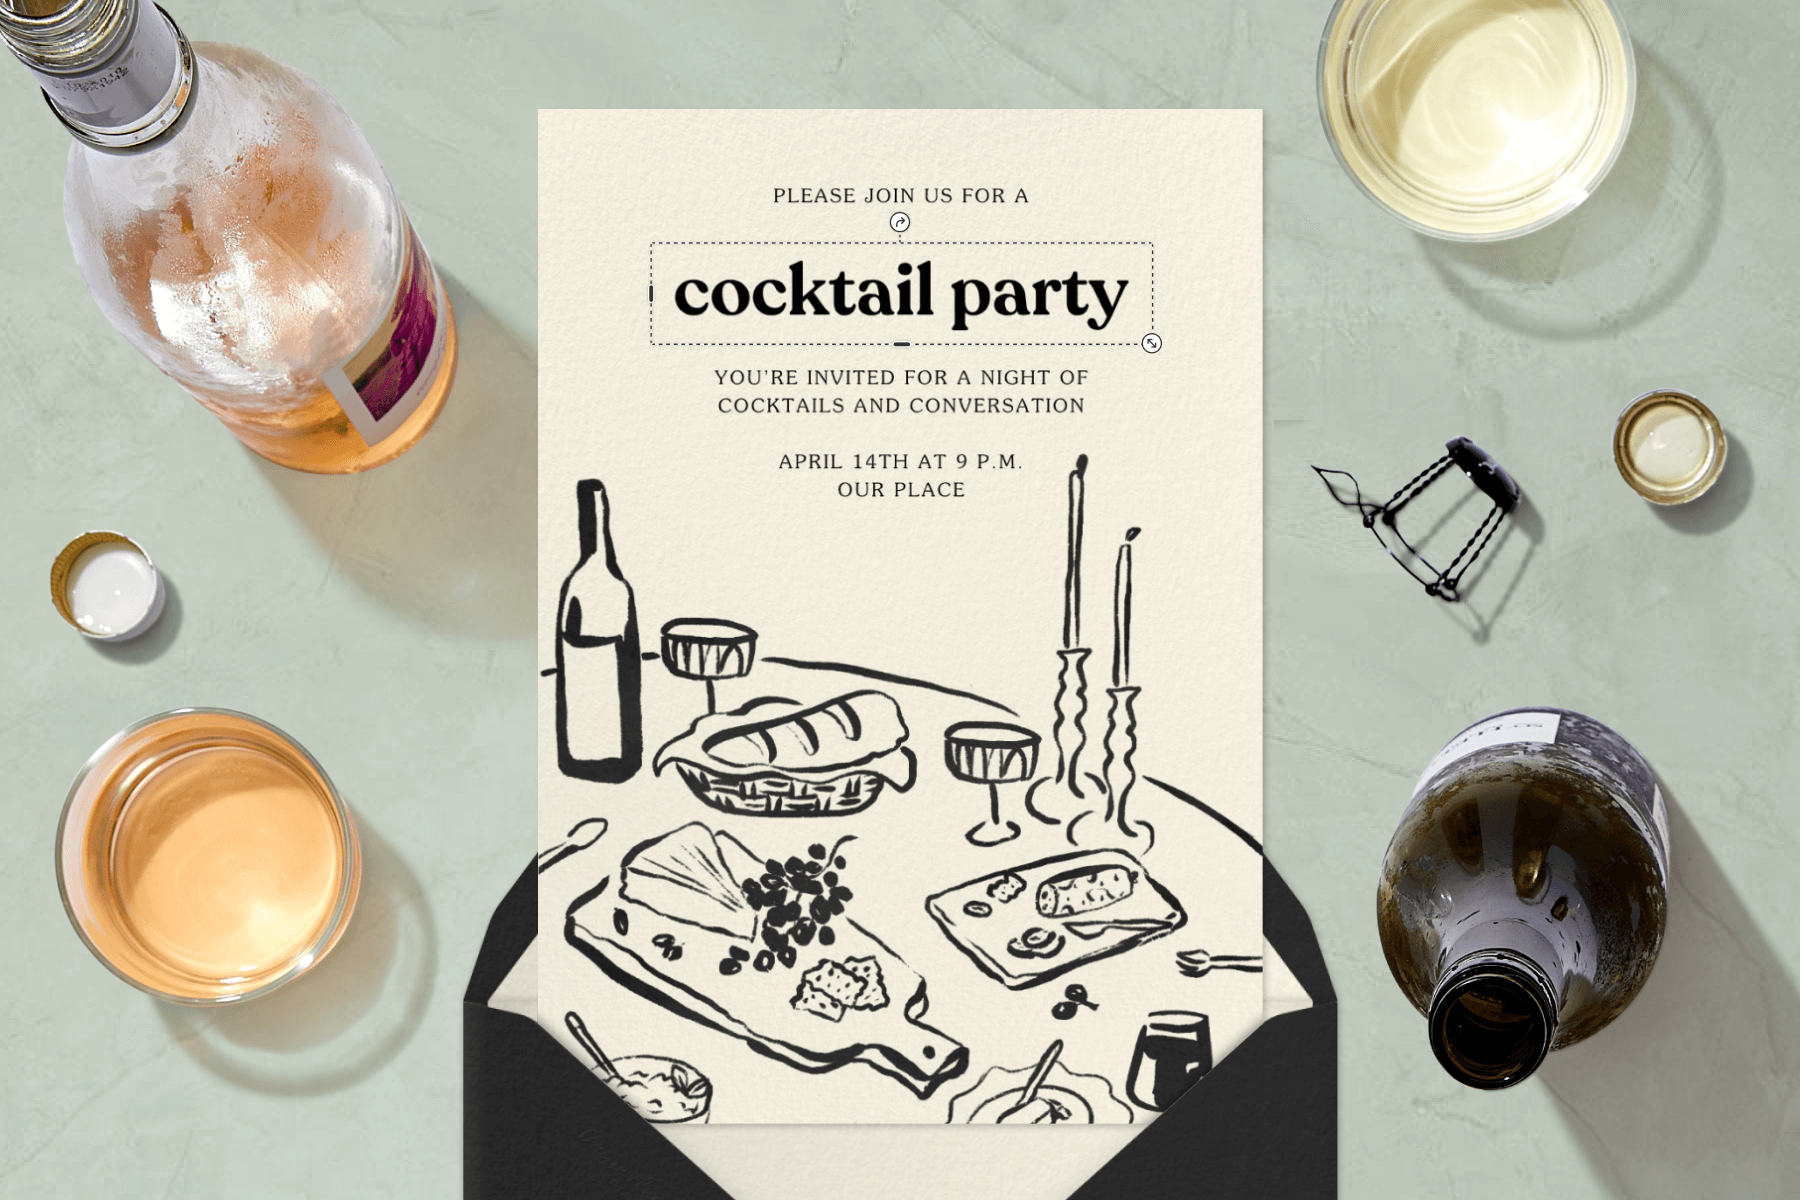 A cocktail party invitation with a doodle-style illustration of a table with cheese, charcuterie, candles, and drinks surrounded by actual bottles and drinks.